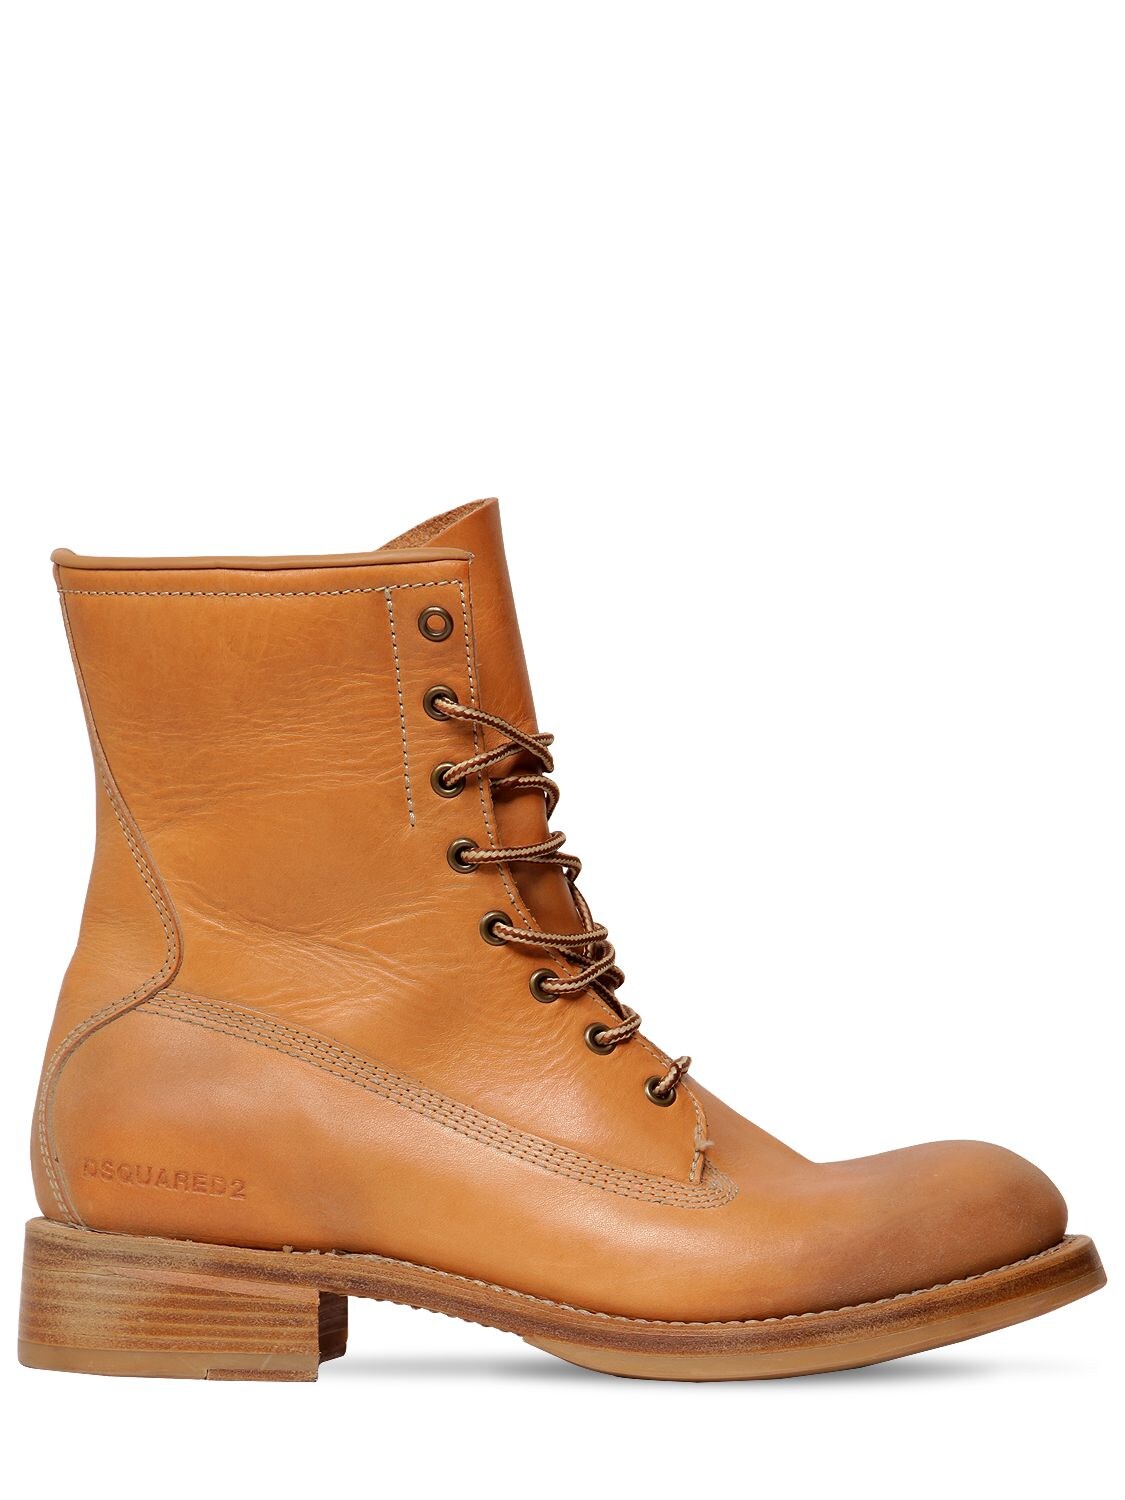 Buy Leather Work Boots for Womens at Goxip